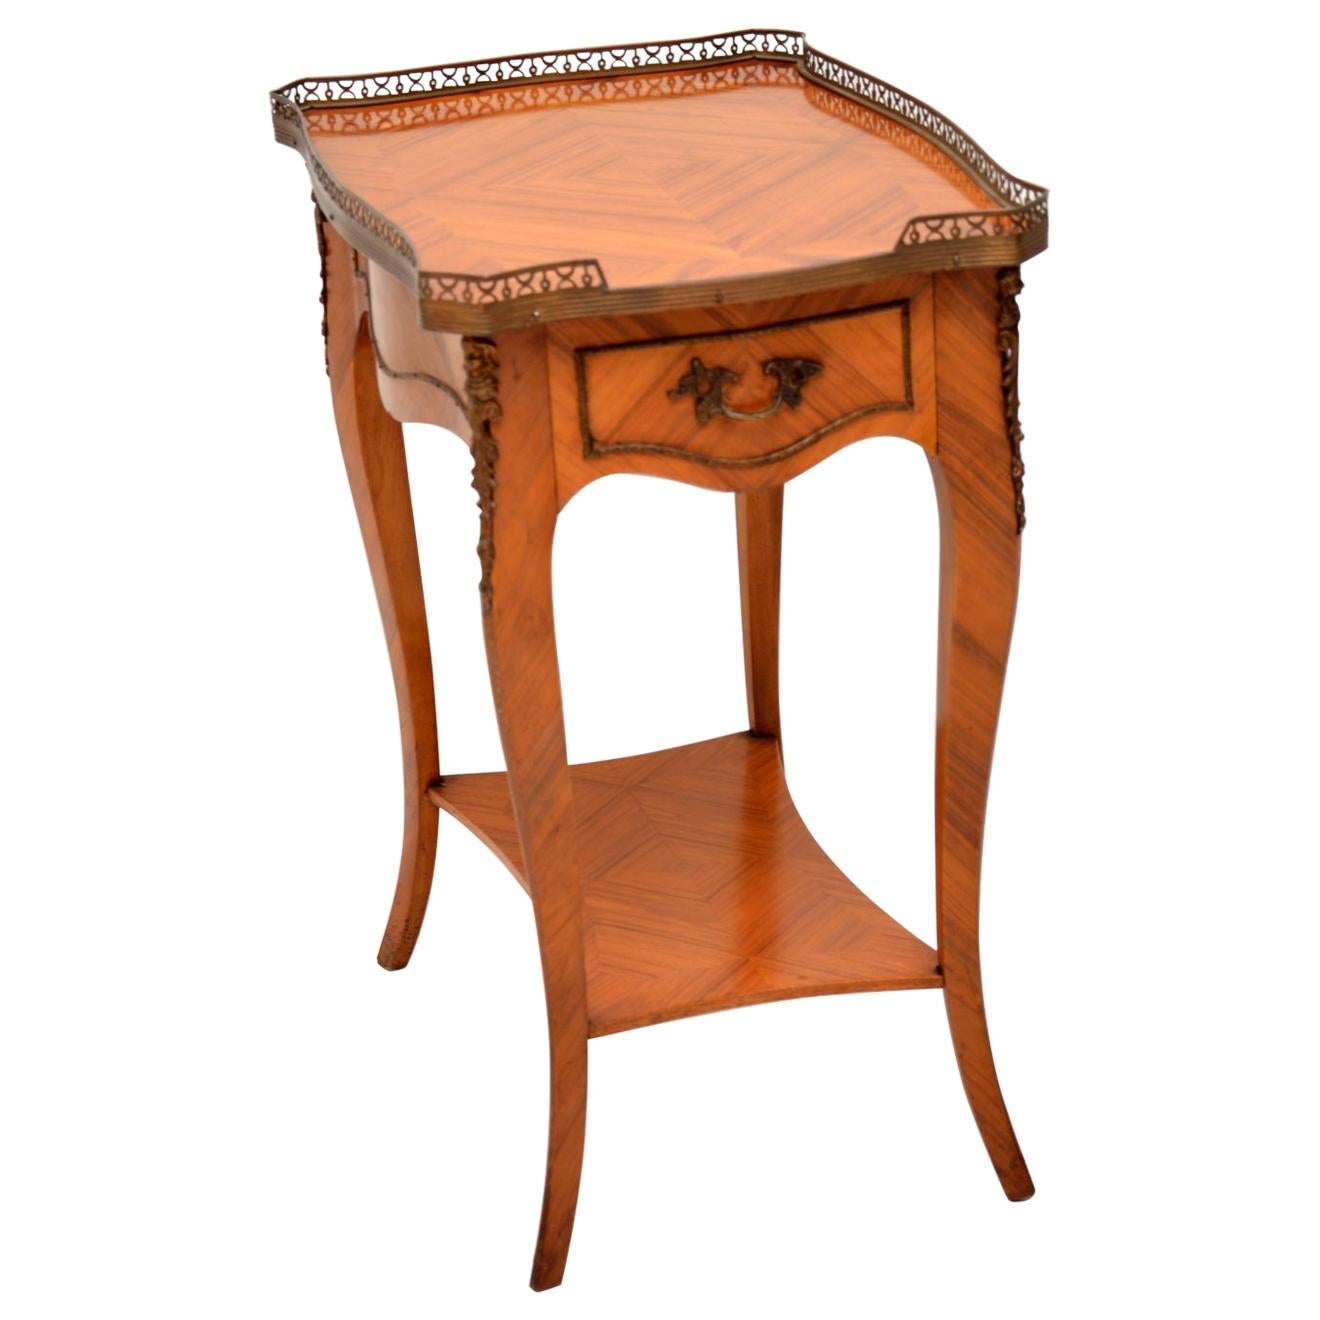 Antique French Louis XV style wood side table in excellent condition and dating to circa 1930s period.

It’s in excellent condition having just been French polished and the wood veneers have some lovely patterns. This table is panelled all the way